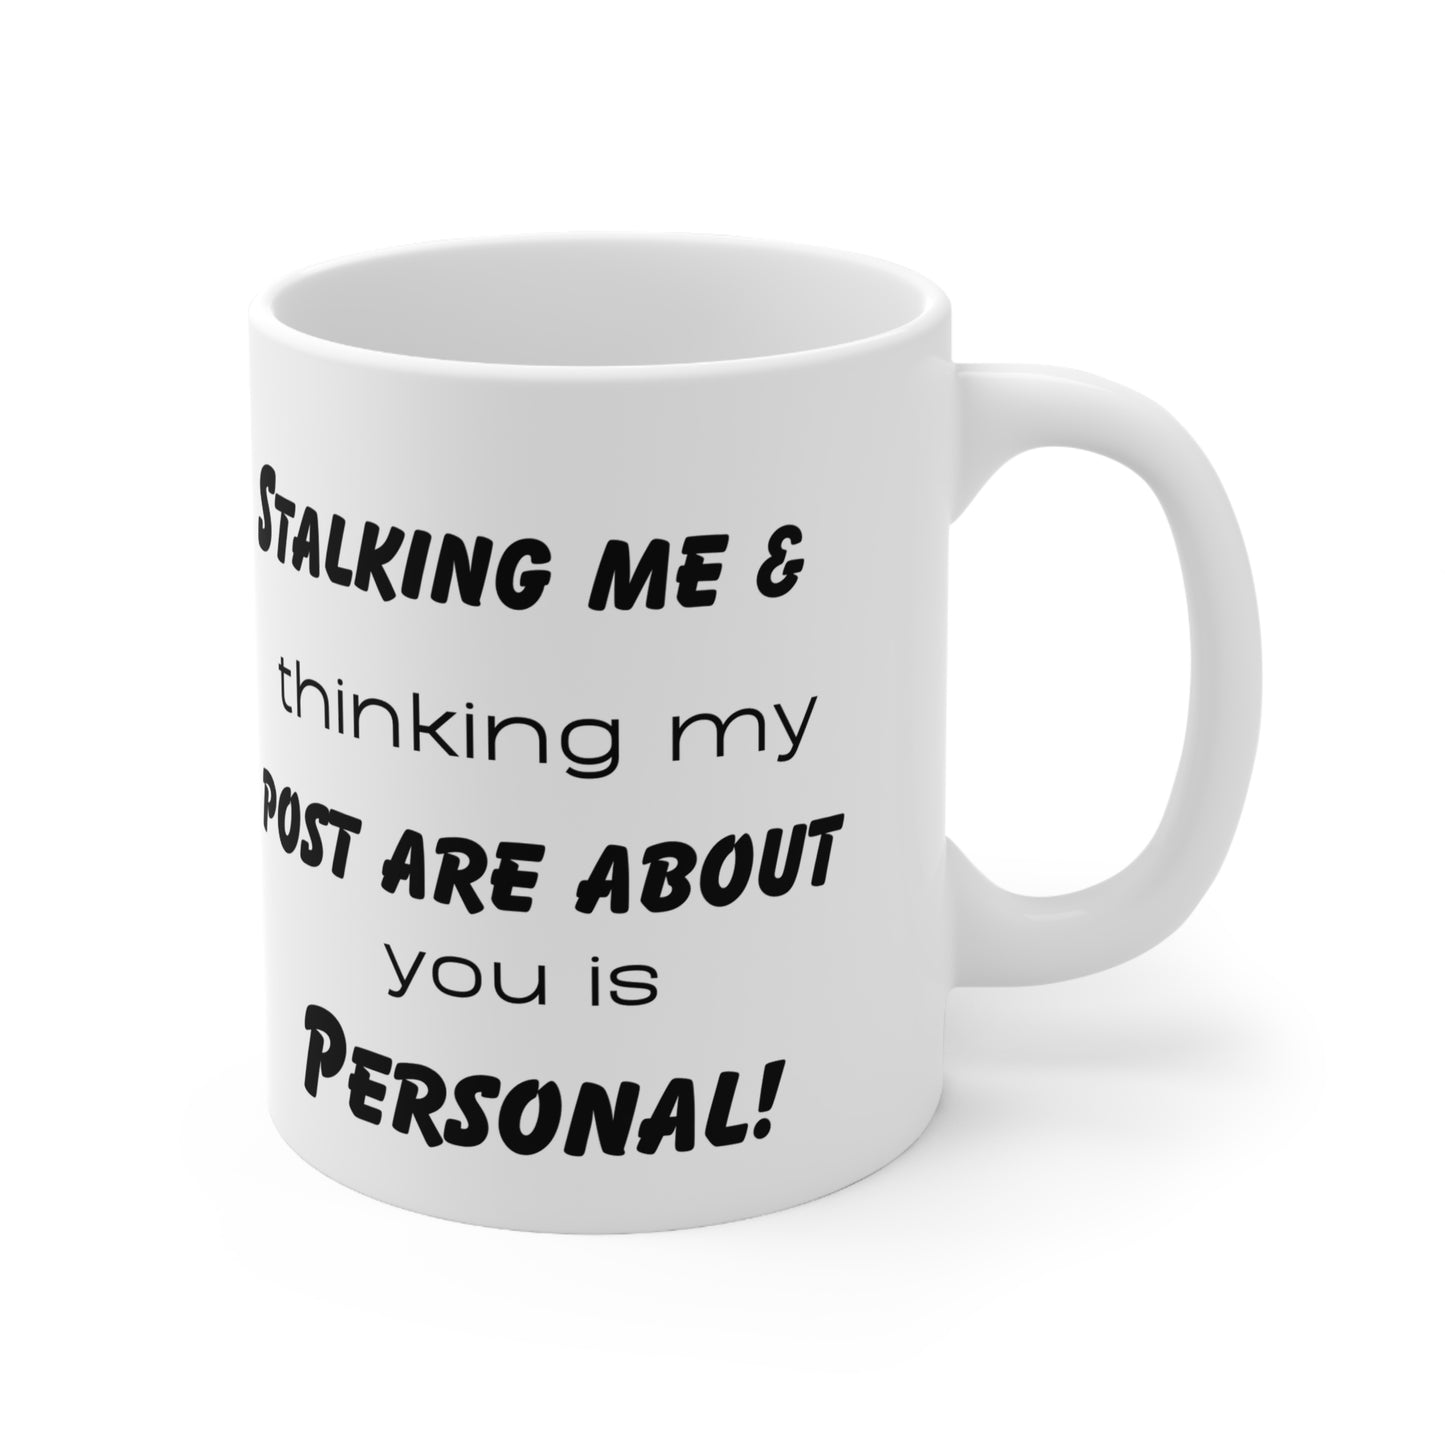 Stalking me and thinking my post are about you is personal! Ceramic Mug 11oz